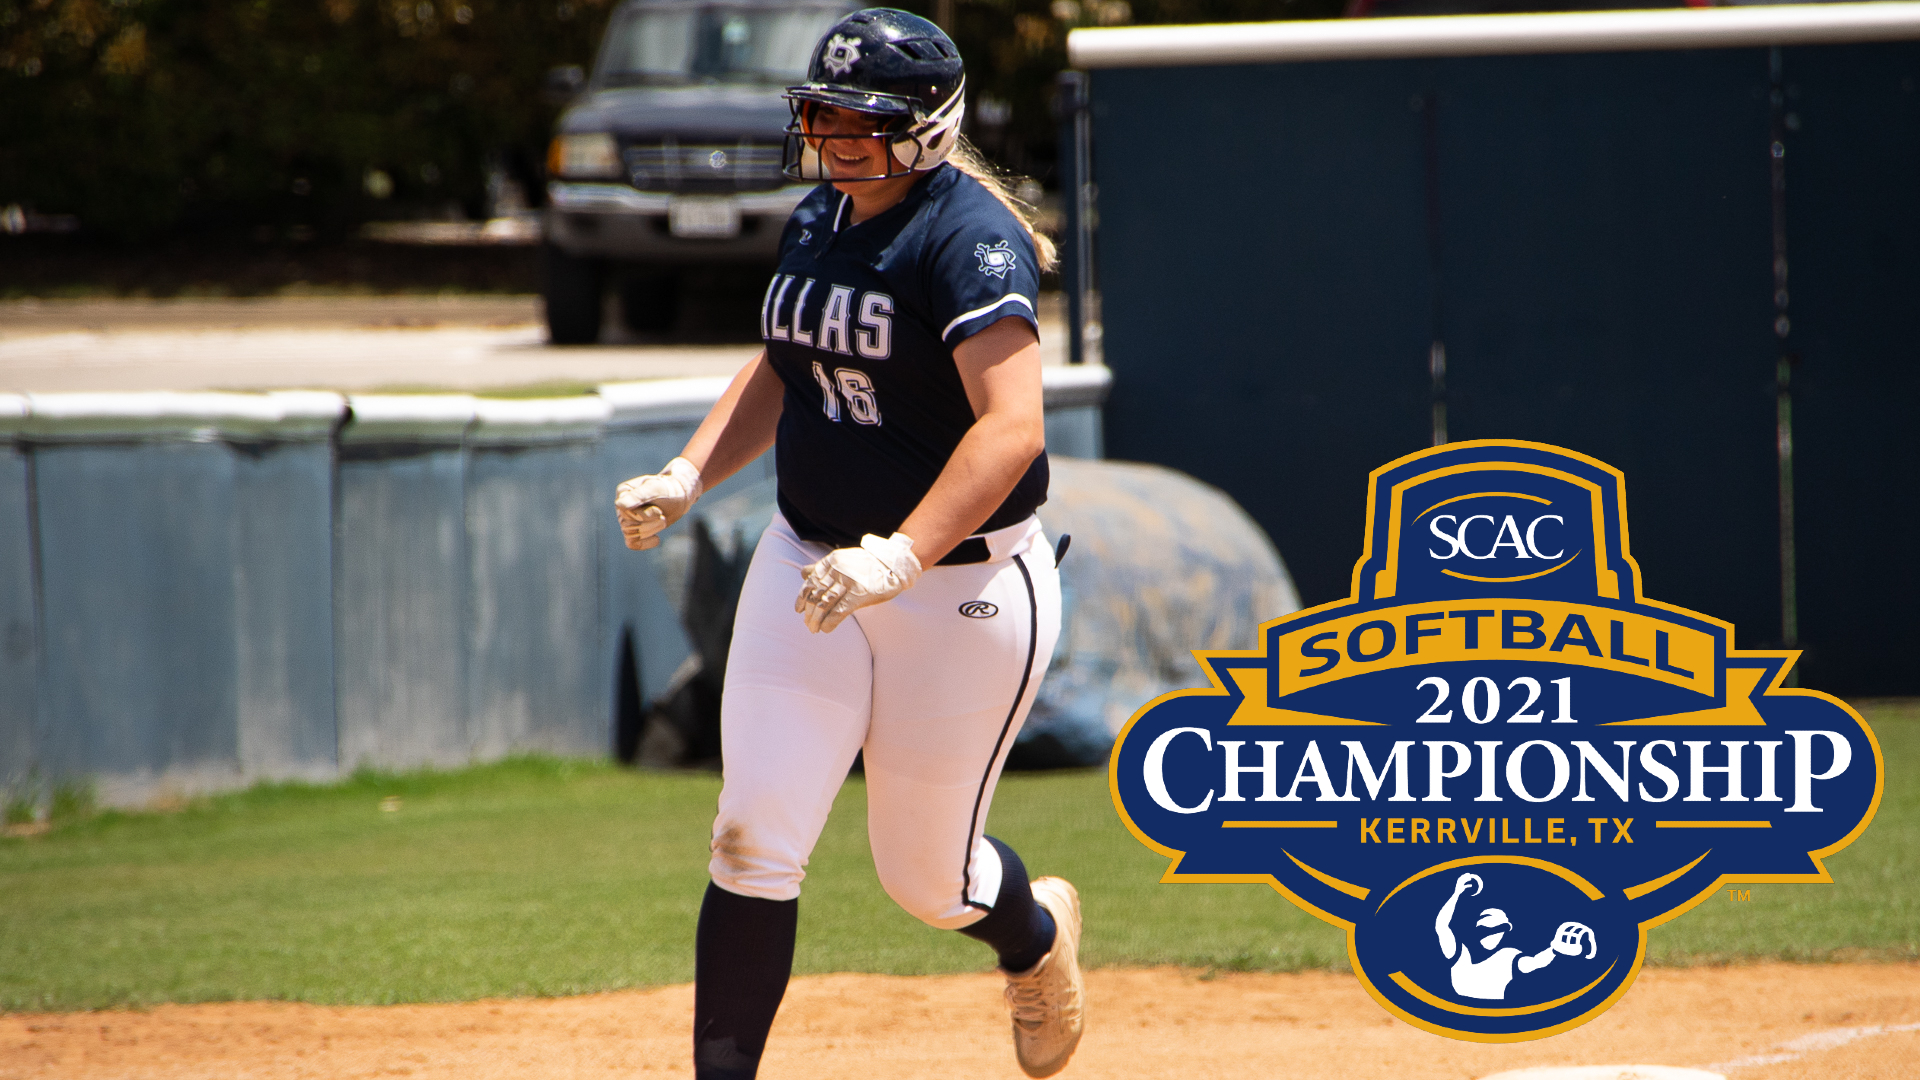 UD Softball Begins SCAC Tournament on Friday